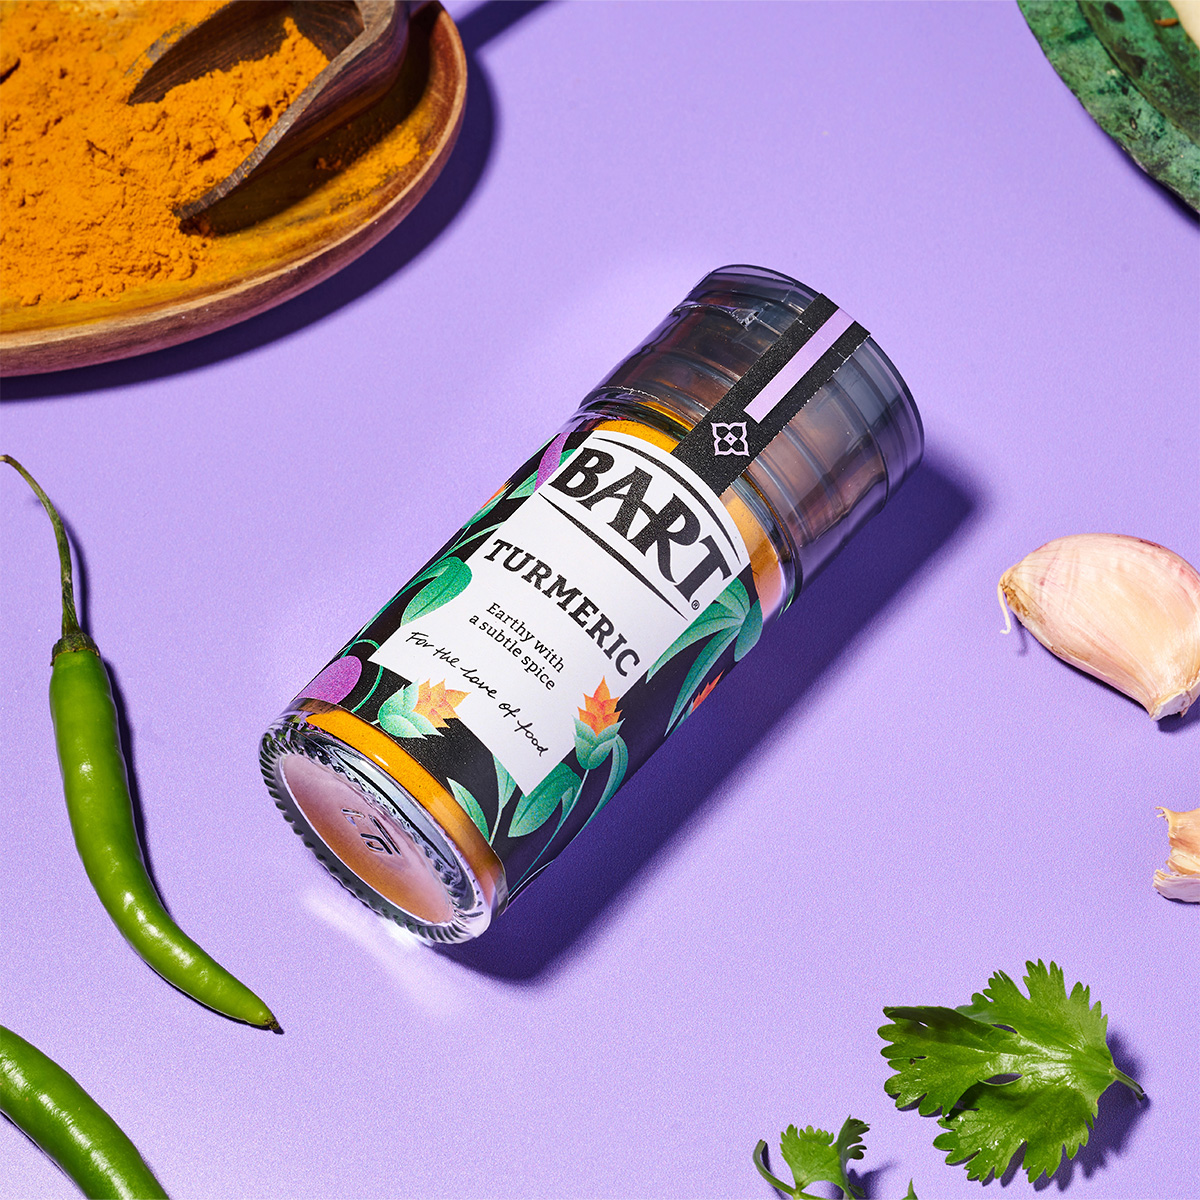 The Space Creative Revitalises Bart Ingredients with Modern Packaging Redesign